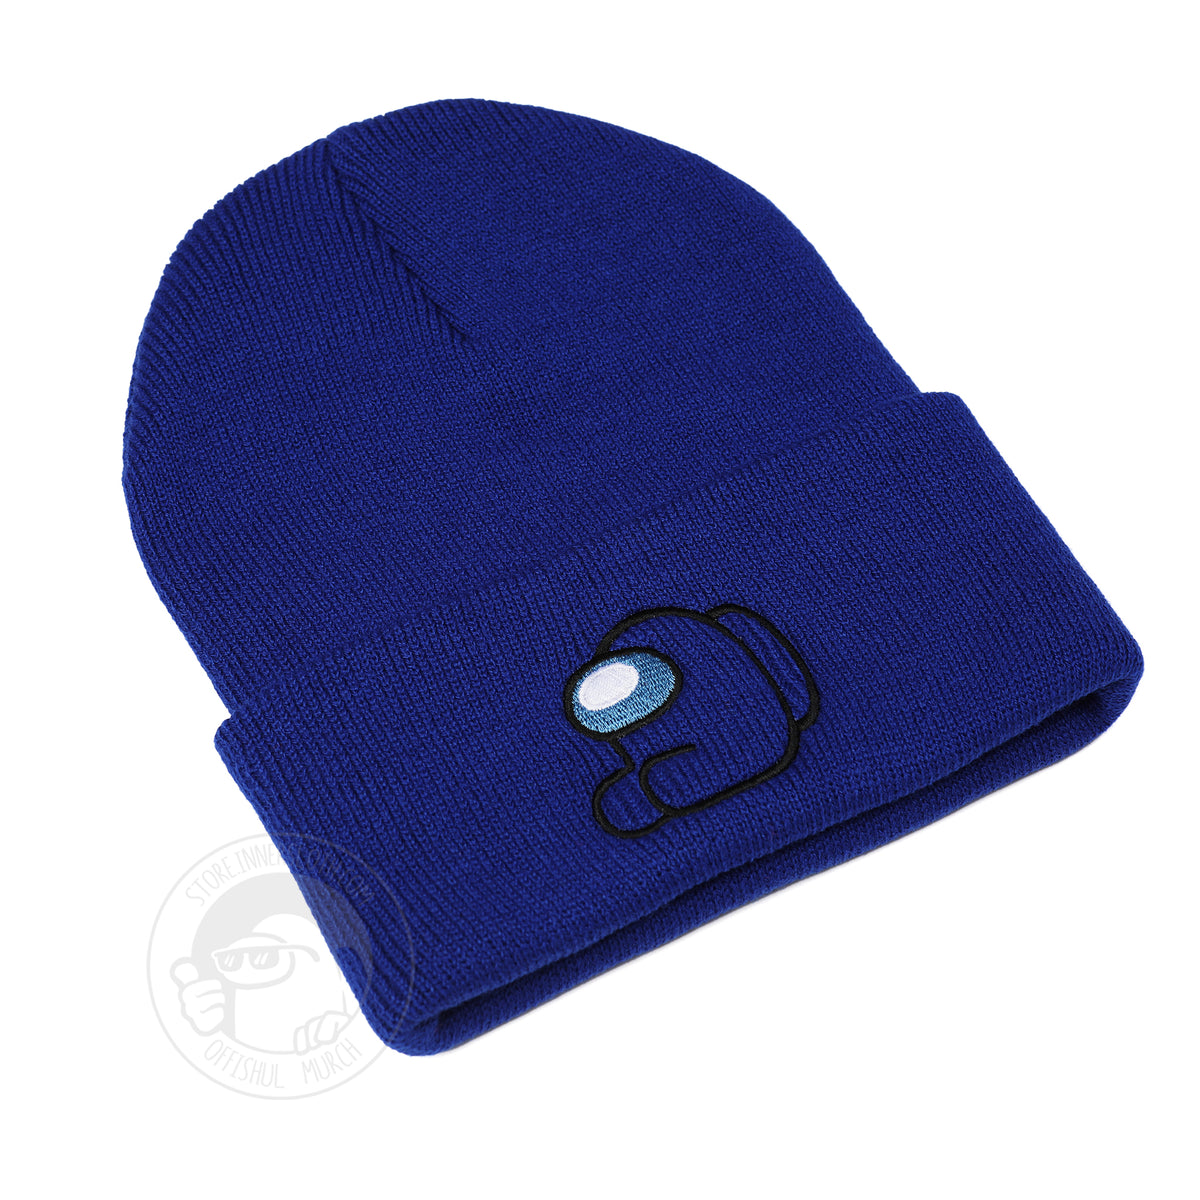 A flat lay photo of the blue beanie, from a diagonal perspective.